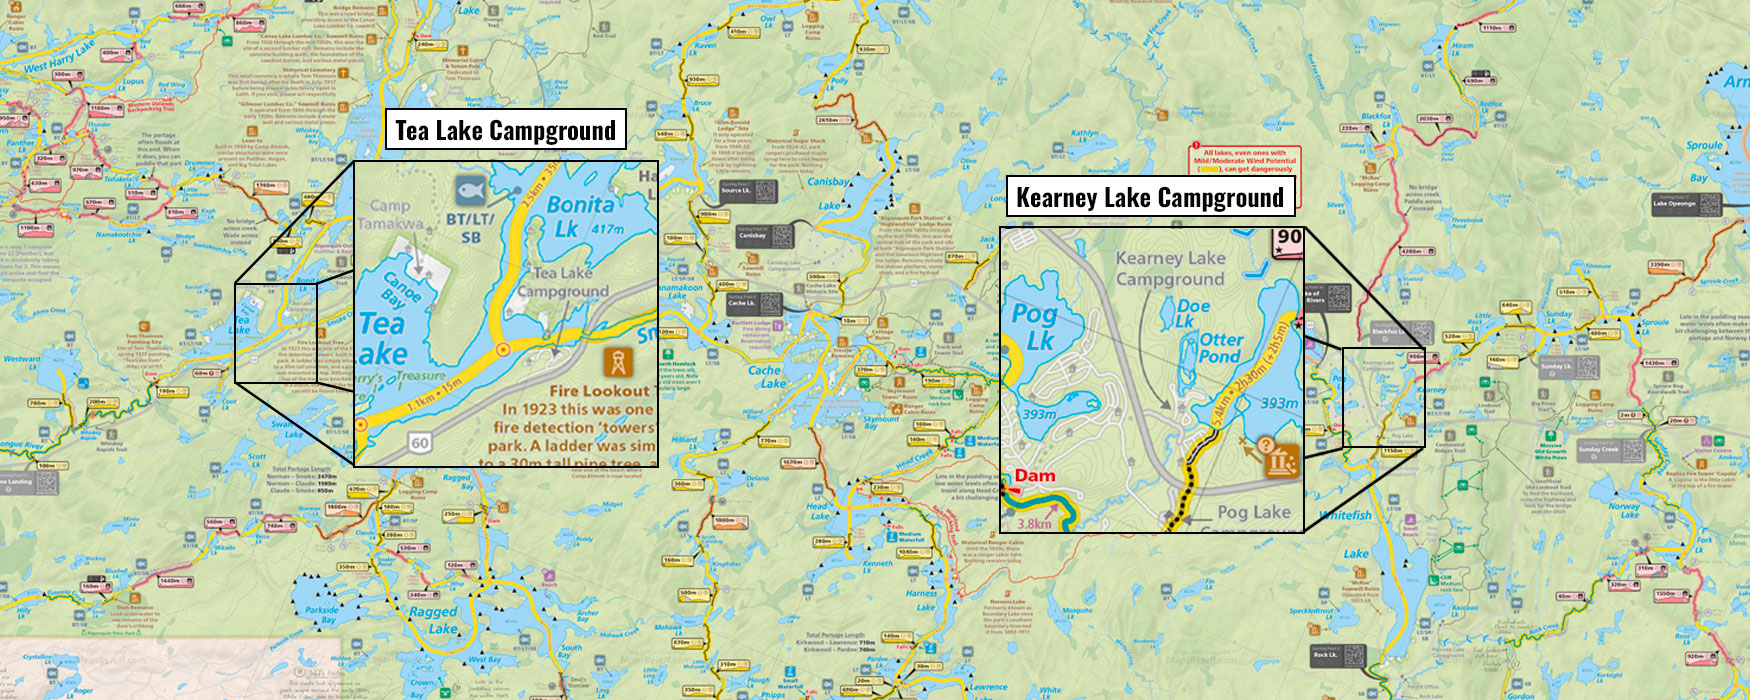 Map and Trip Details for The Trip Report "Day Trip to Kearney Lake and Tea Lake Campgrounds" in Algonquin Park